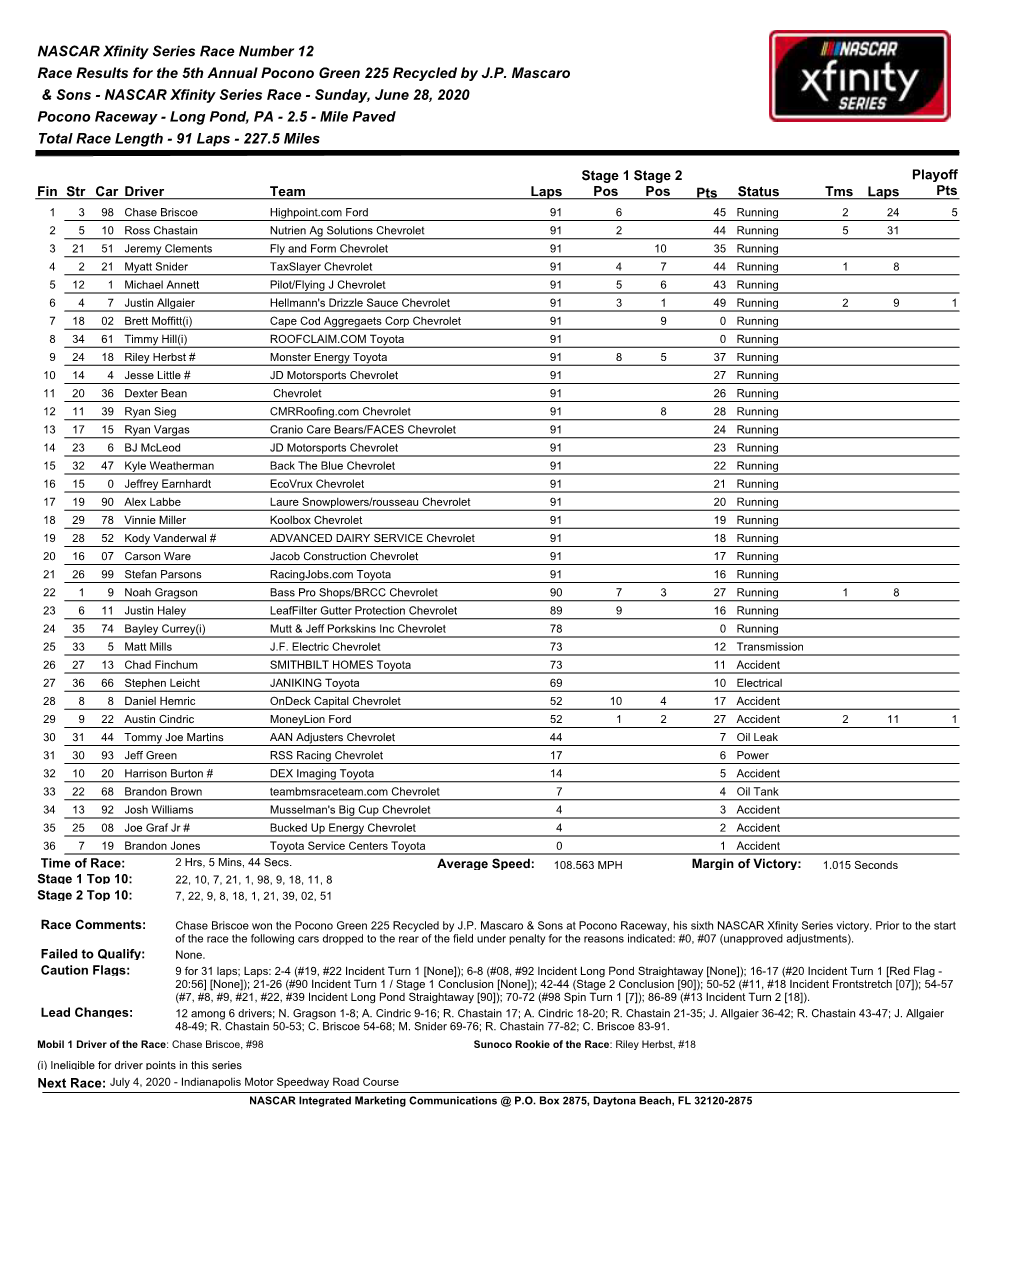 Race Results for the 5Th Annual Pocono Green 225 Recycled by J.P